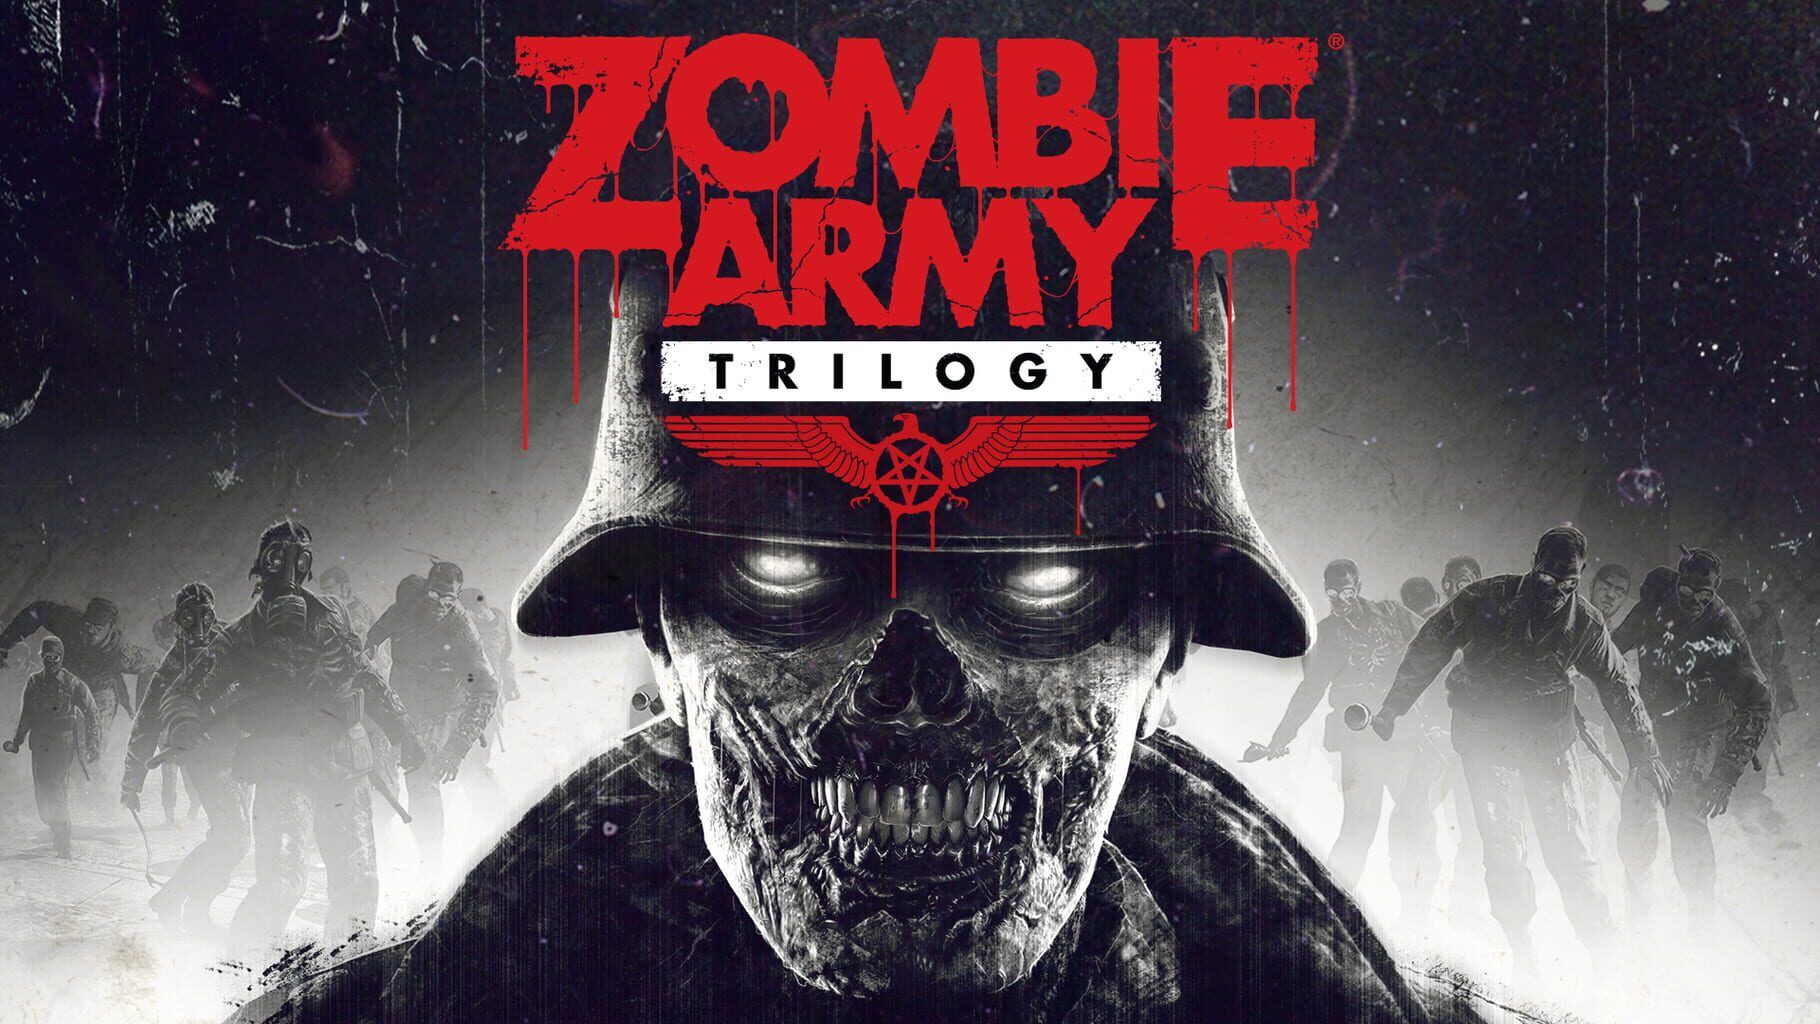 Artwork for Zombie Army Trilogy